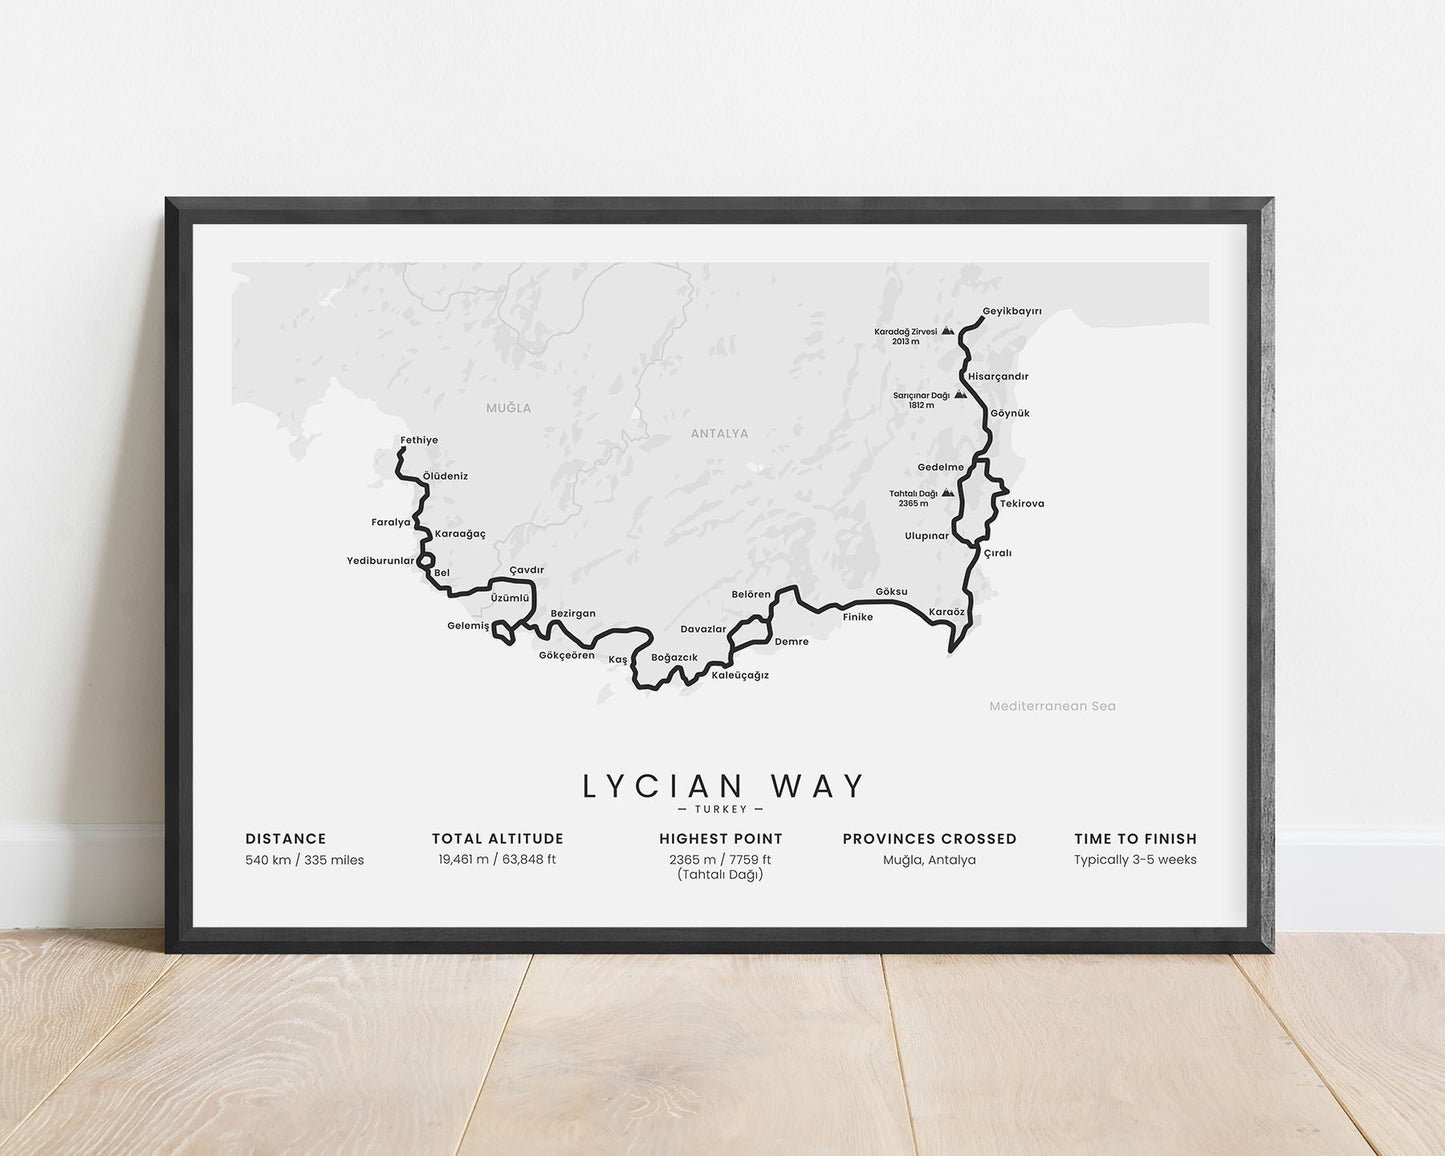 Lycian Way hiking trail in Mediterranean, South Turkey, minimalist map poster with black frame and white background